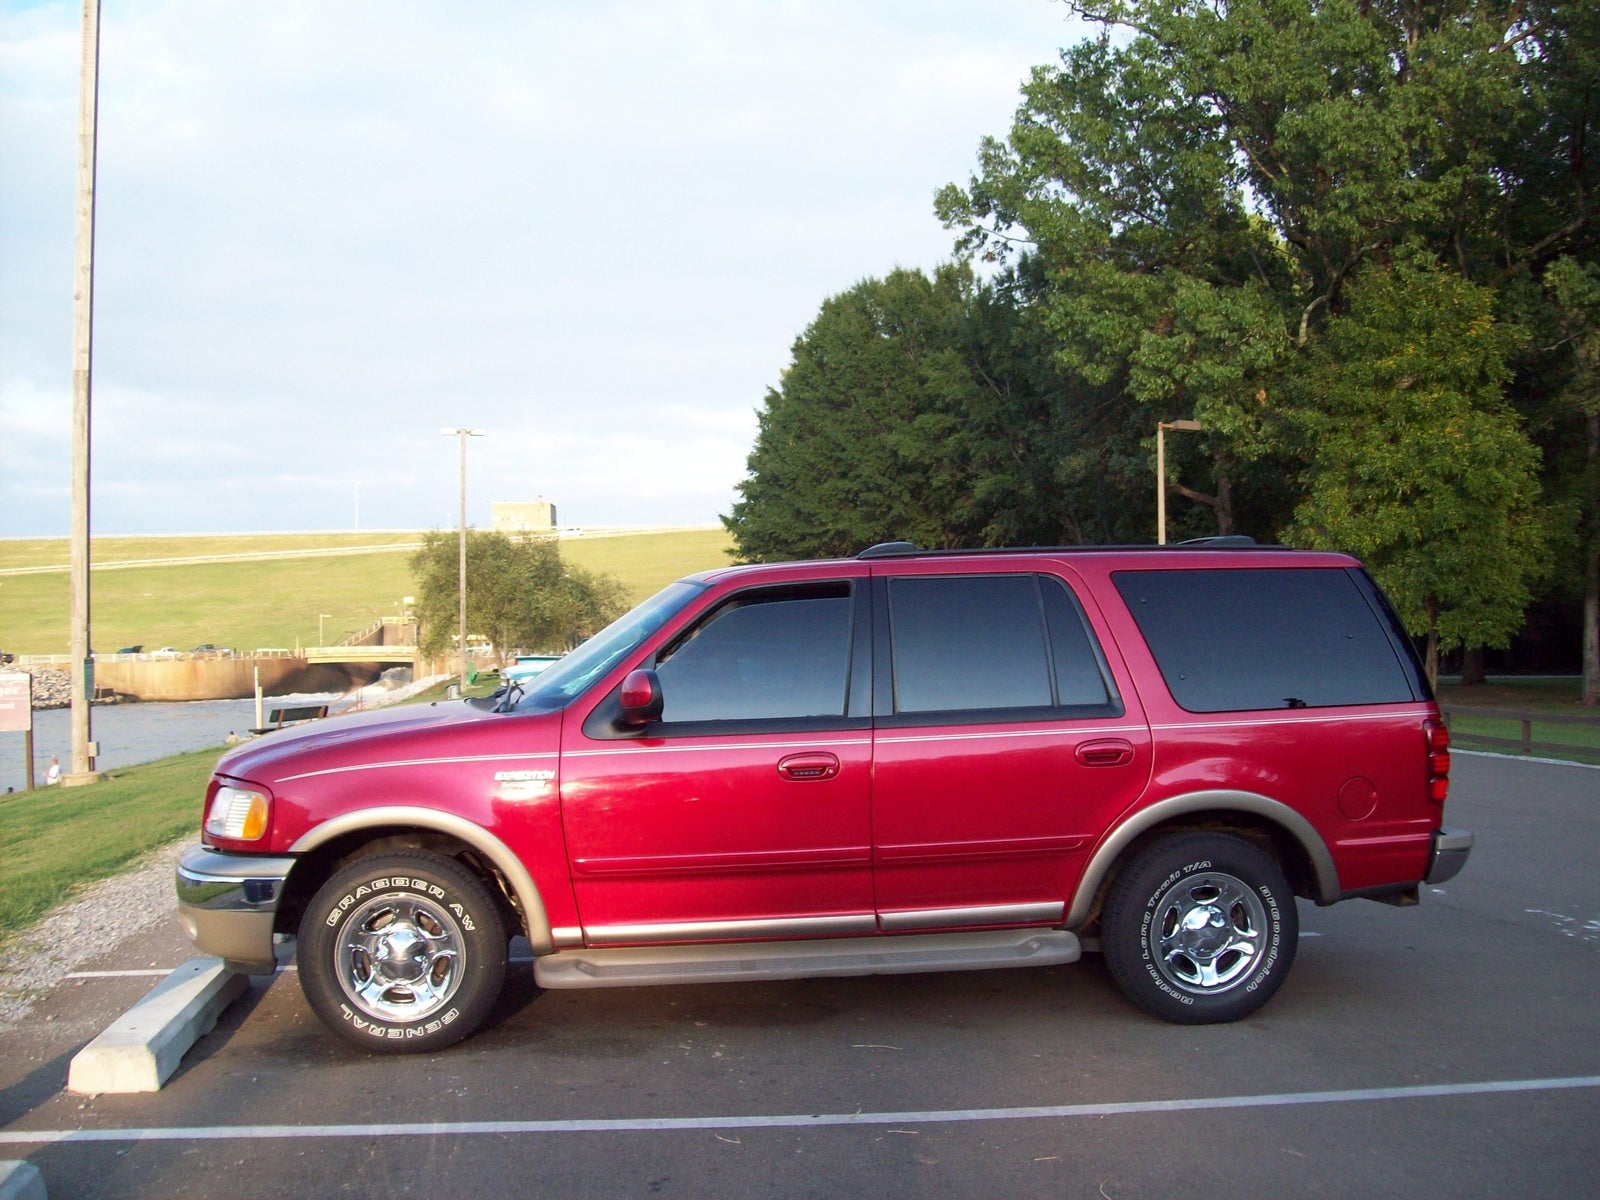 2000 Eddie bauer ford expedition review #8